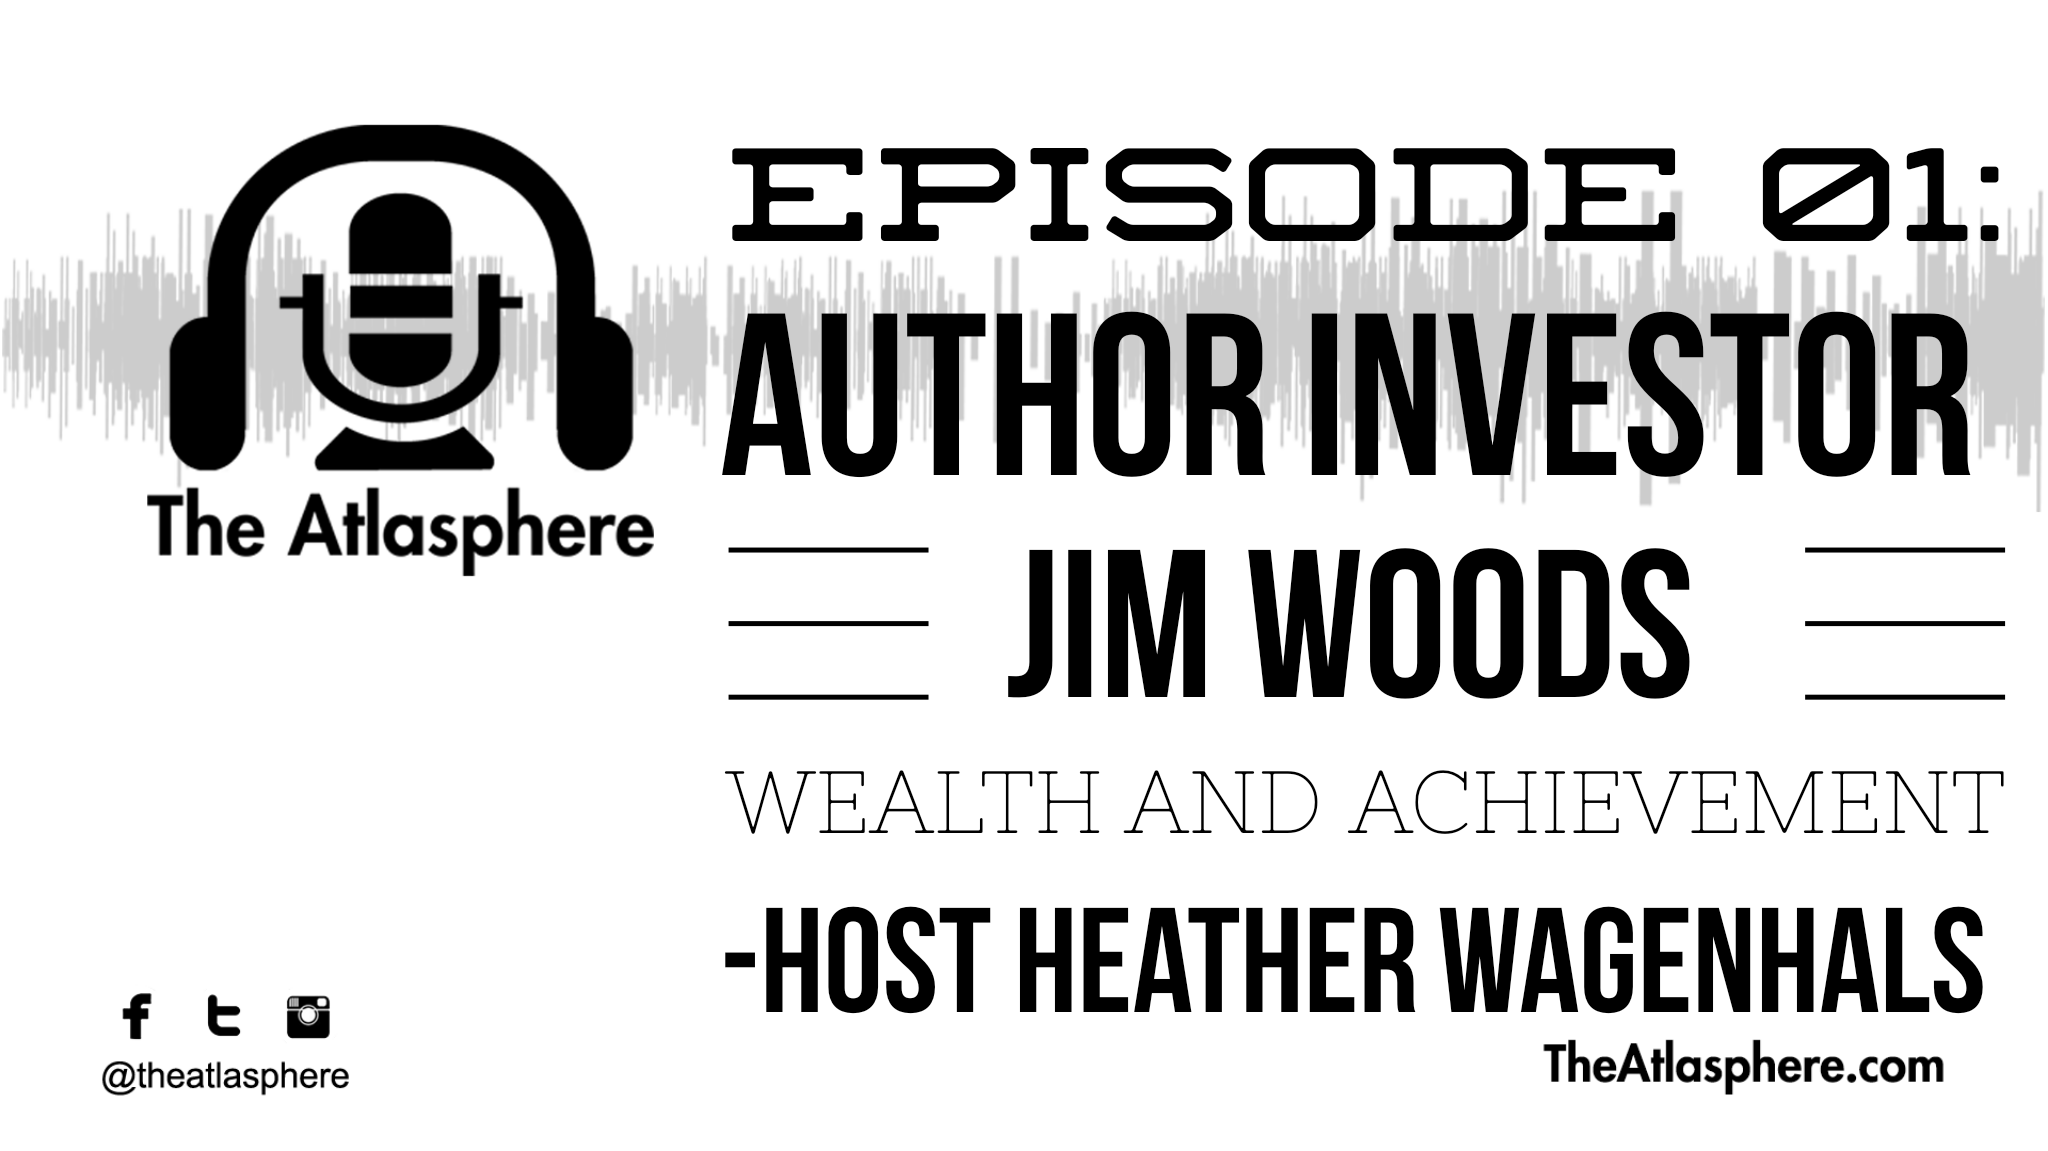 INVESTMENT AUTHOR JIM WOODS DISCUSSES WEALTH AND ACHIEVEMENT FROM THE ATLASPHERE EPISODE 01 image on The Atlasphere